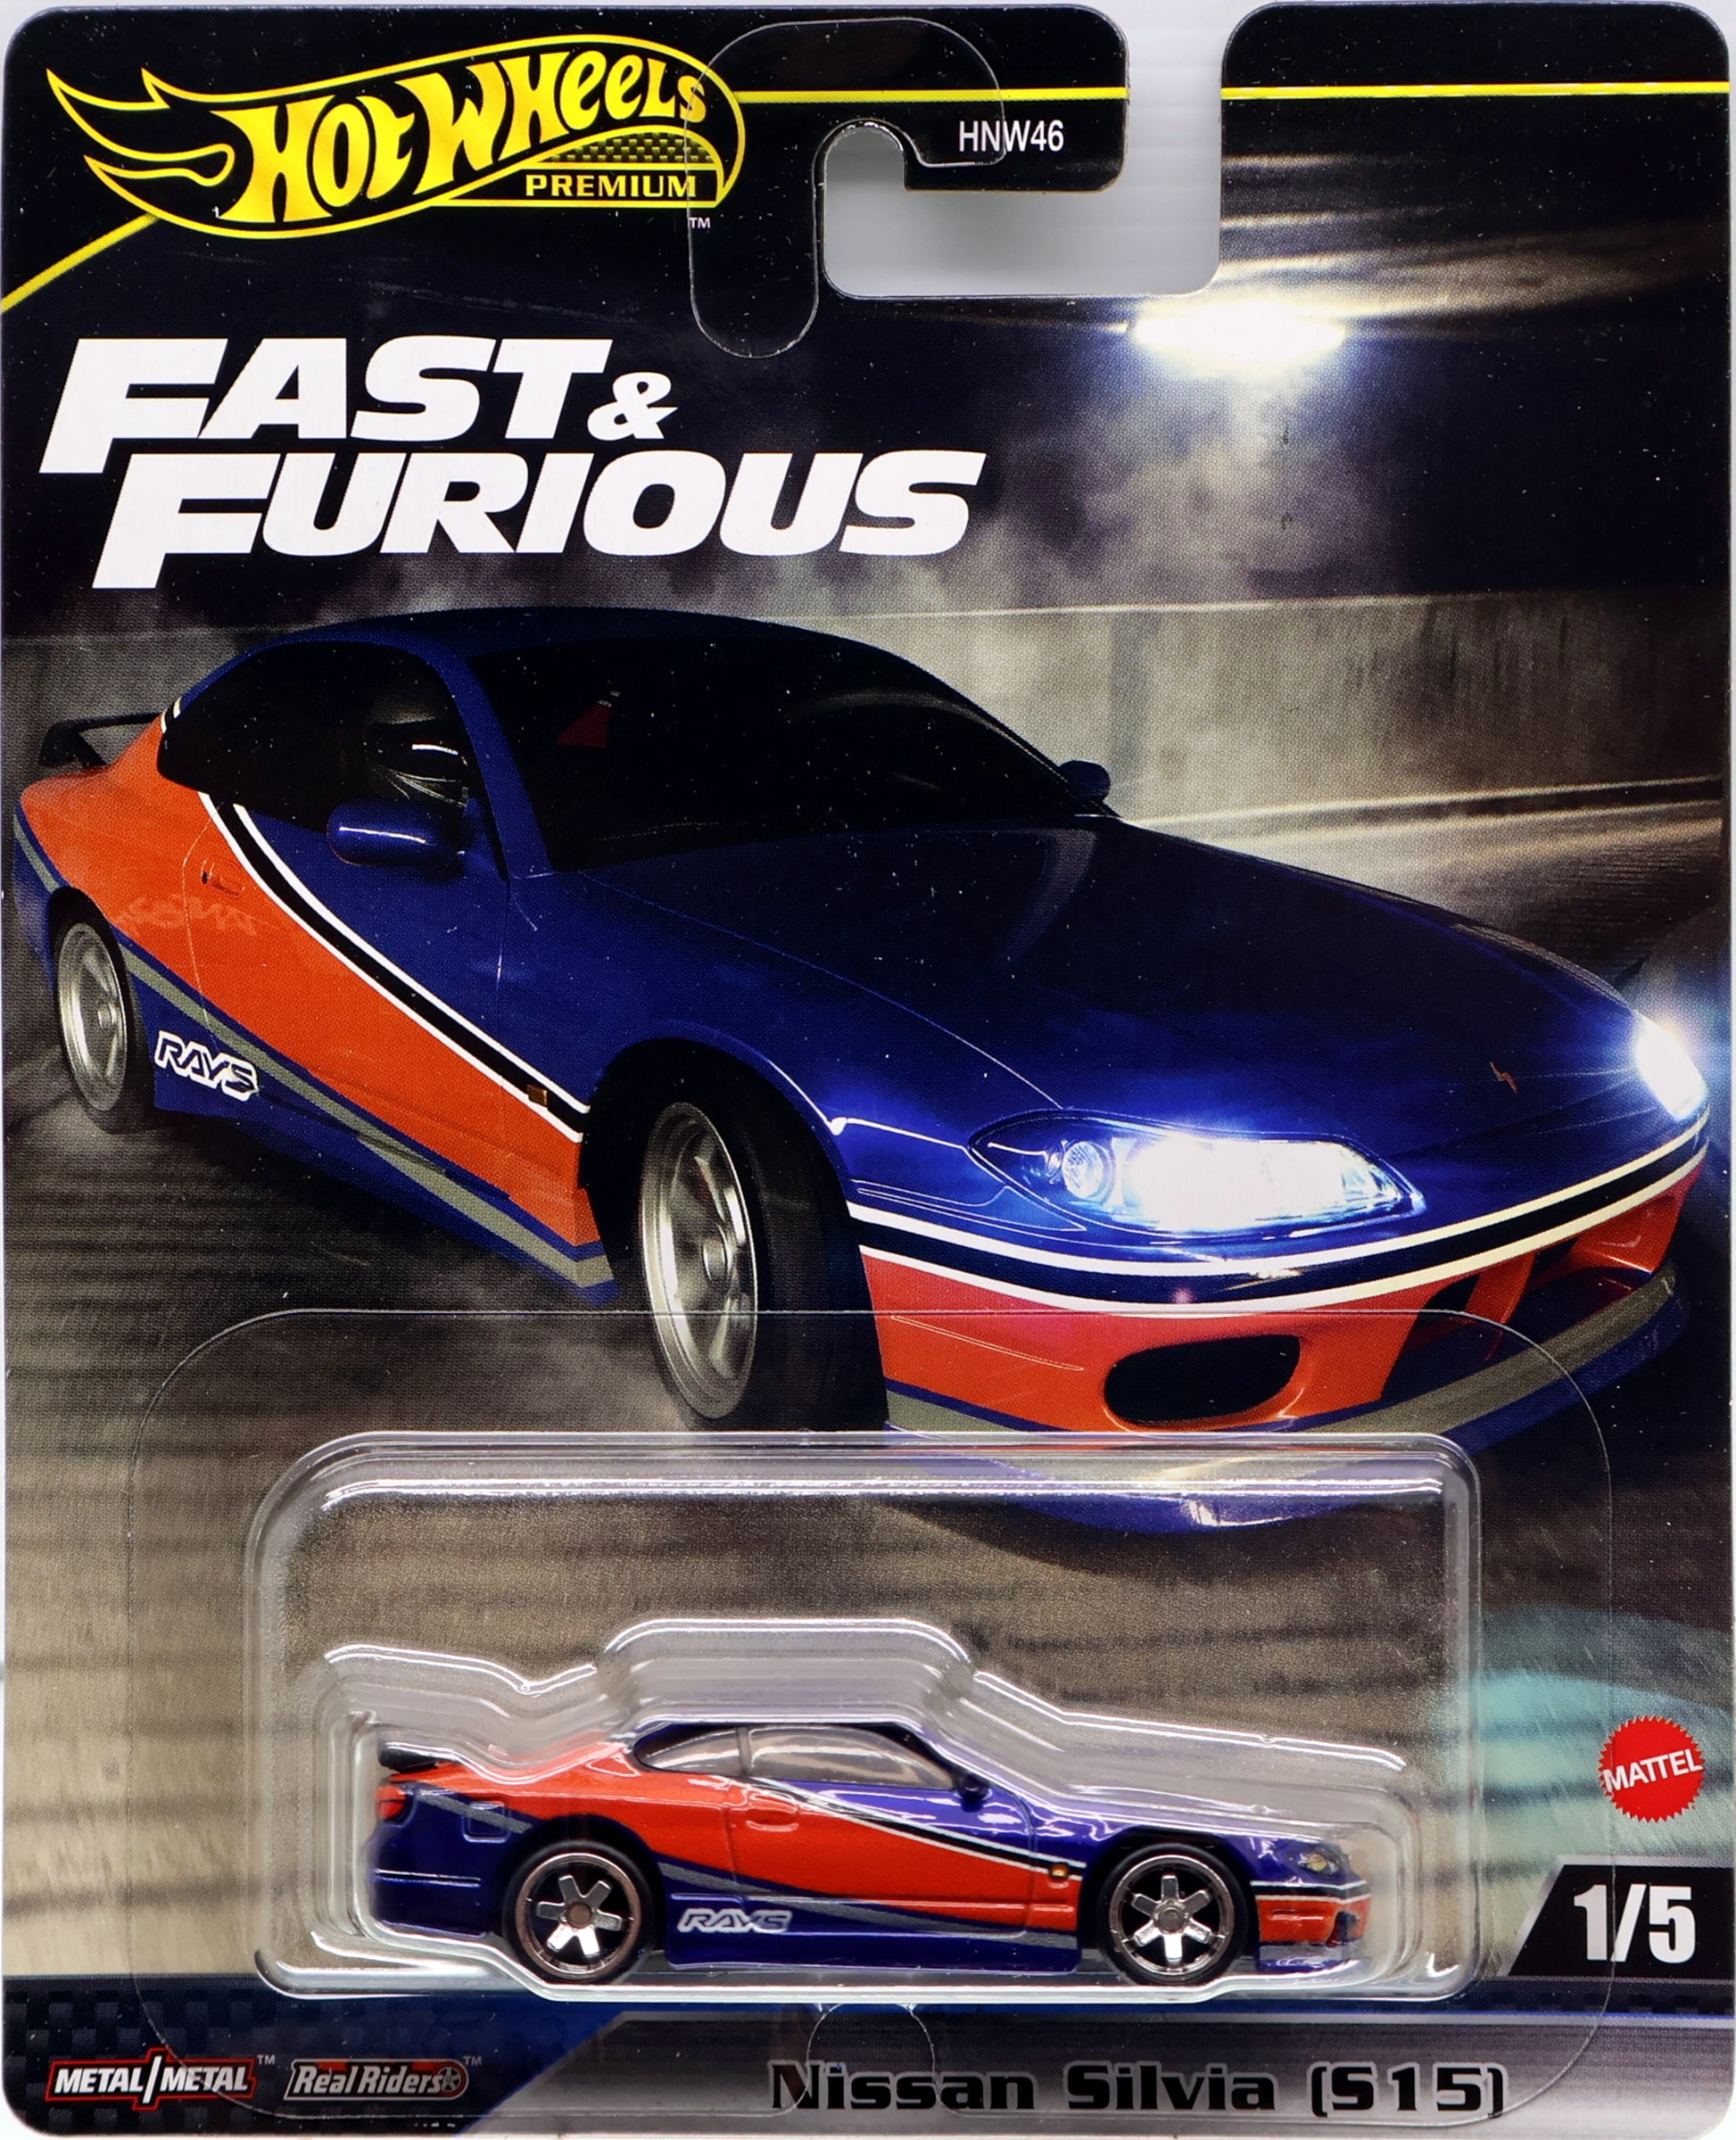 Image: Diecast model of a Nissan Silvia from the Fast and Furious movie series, featuring the iconic Hot Wheels logo.  Alt text: "Diecast model of a Nissan Silvia, as seen in Fast and Furious, adorned with Hot Wheels branding."  Shop now at tatoyshop.com.